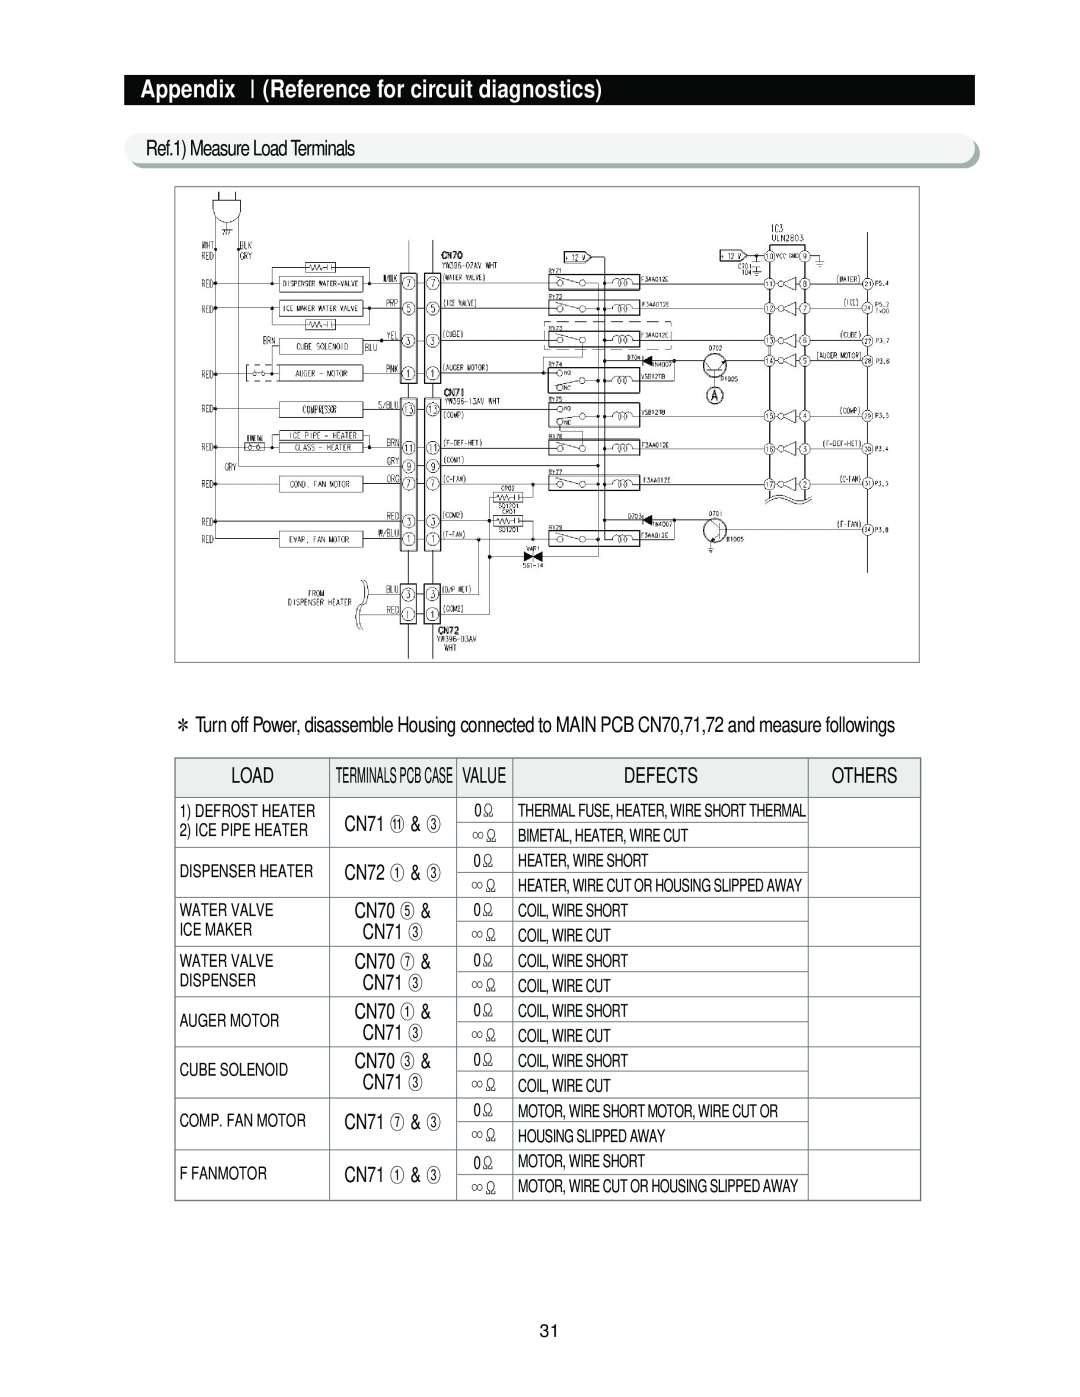 Samsung RS2*3* manual Appendix ⅠReference for circuit diagnostics, Ref.1 Measure Load Terminals, Defects, Others, CN71 ③ 